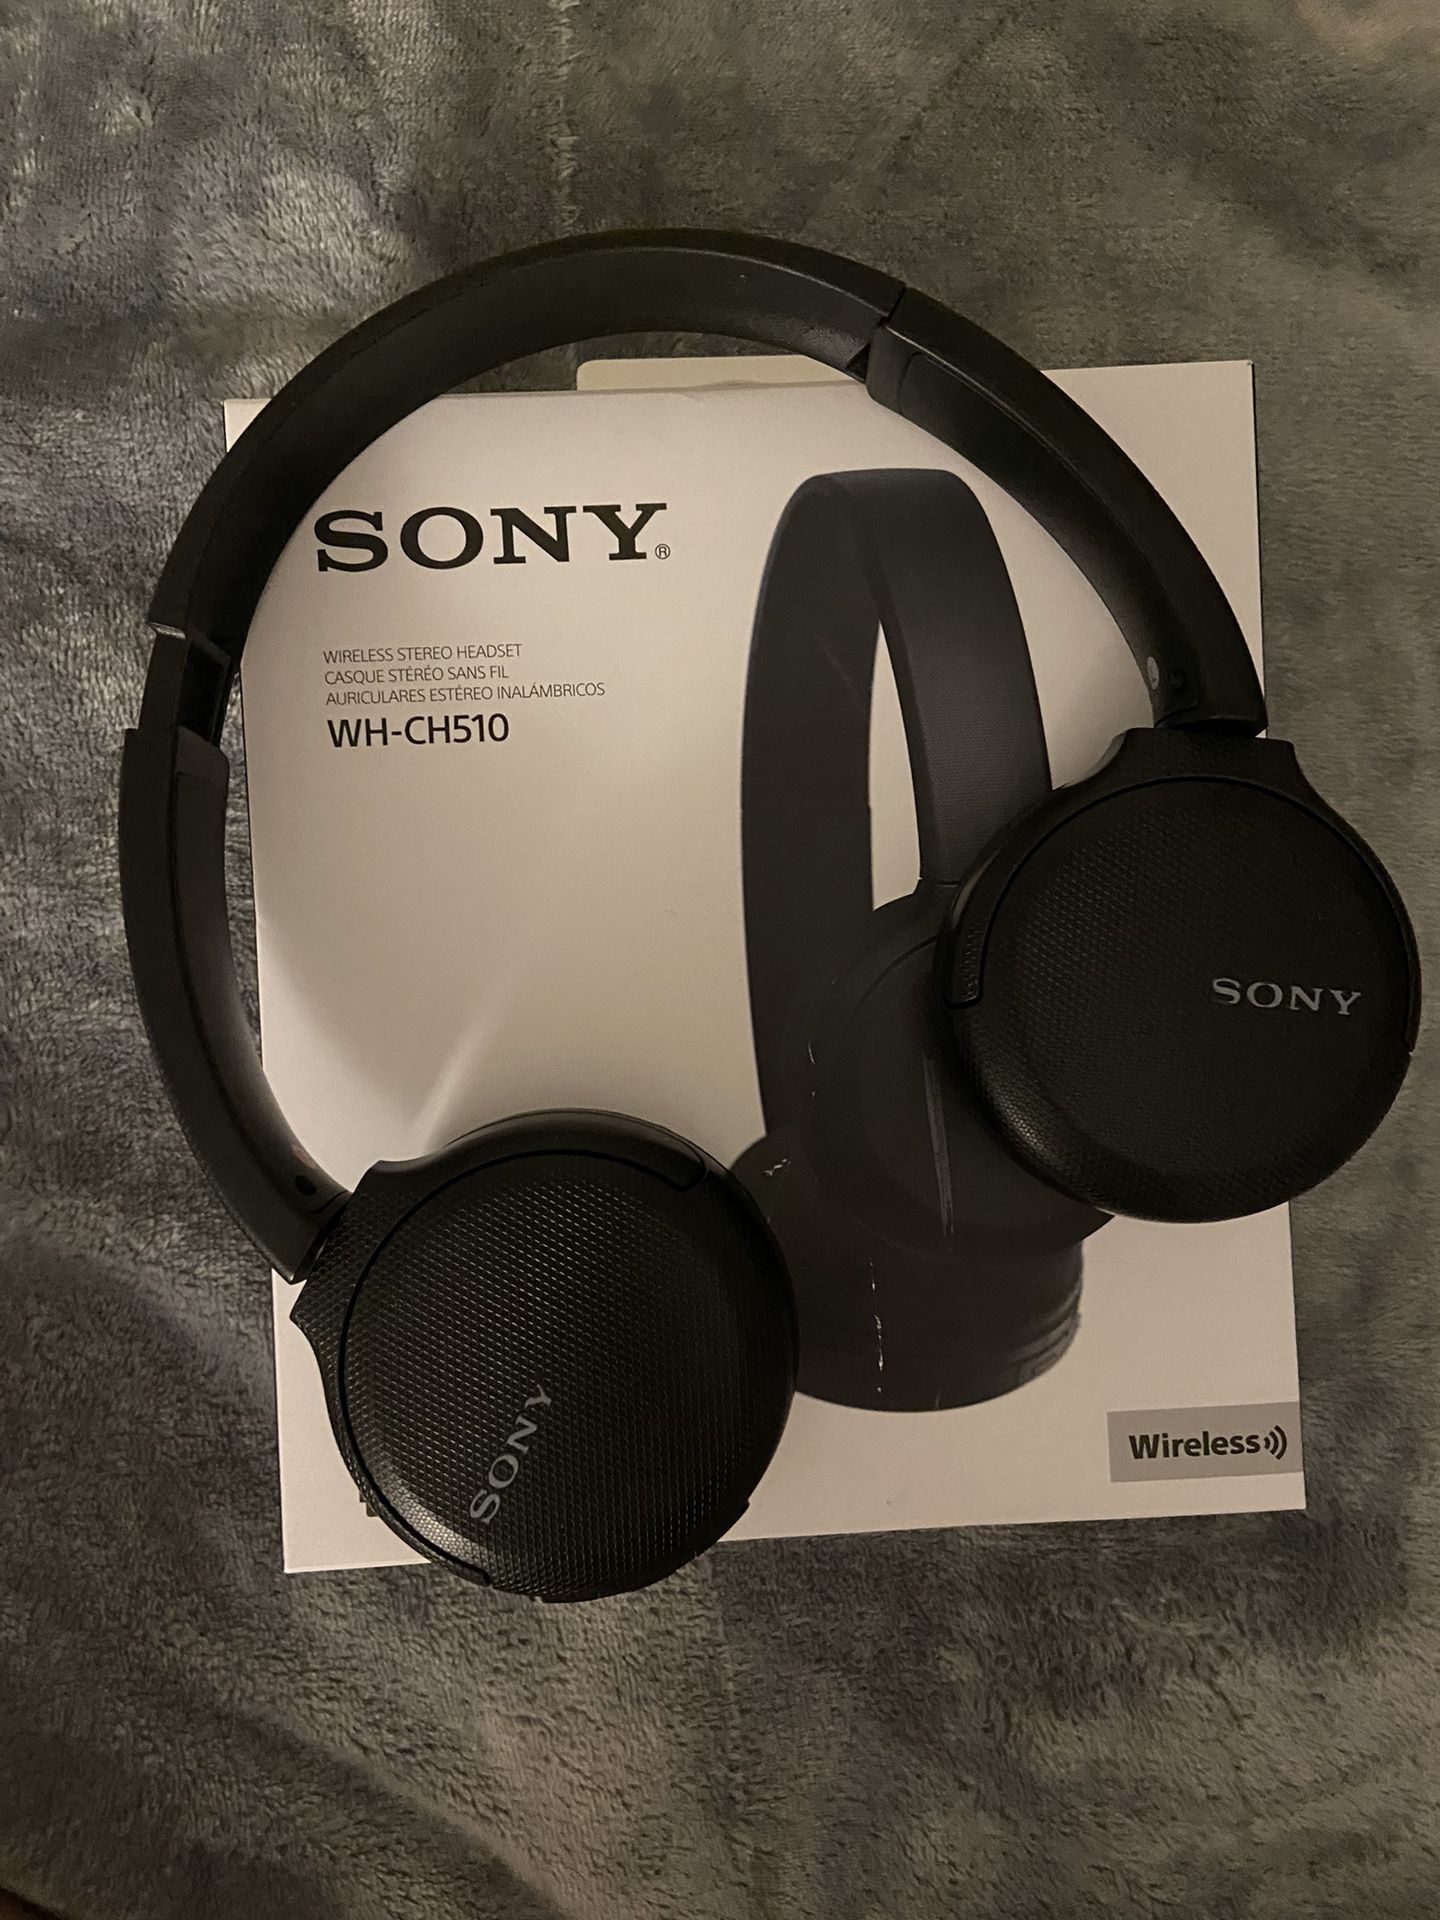 Sony WH-CH510 Headset